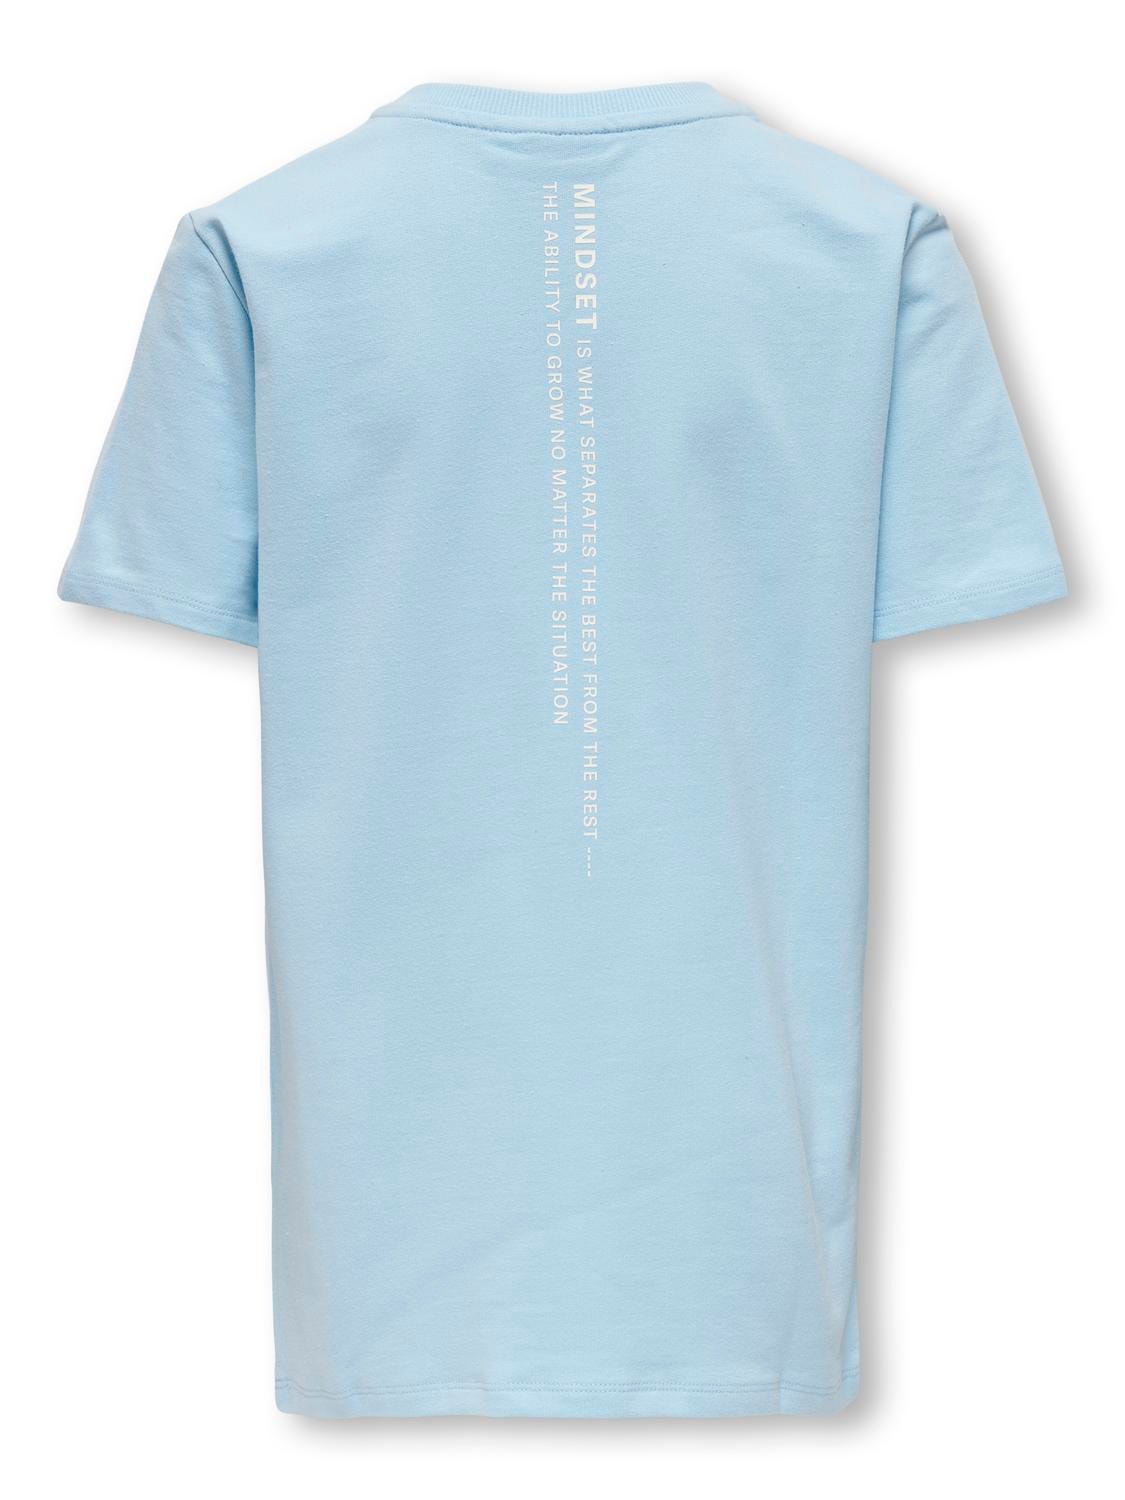 ONLY O-hals t-shirt -Clear Sky - 15321711